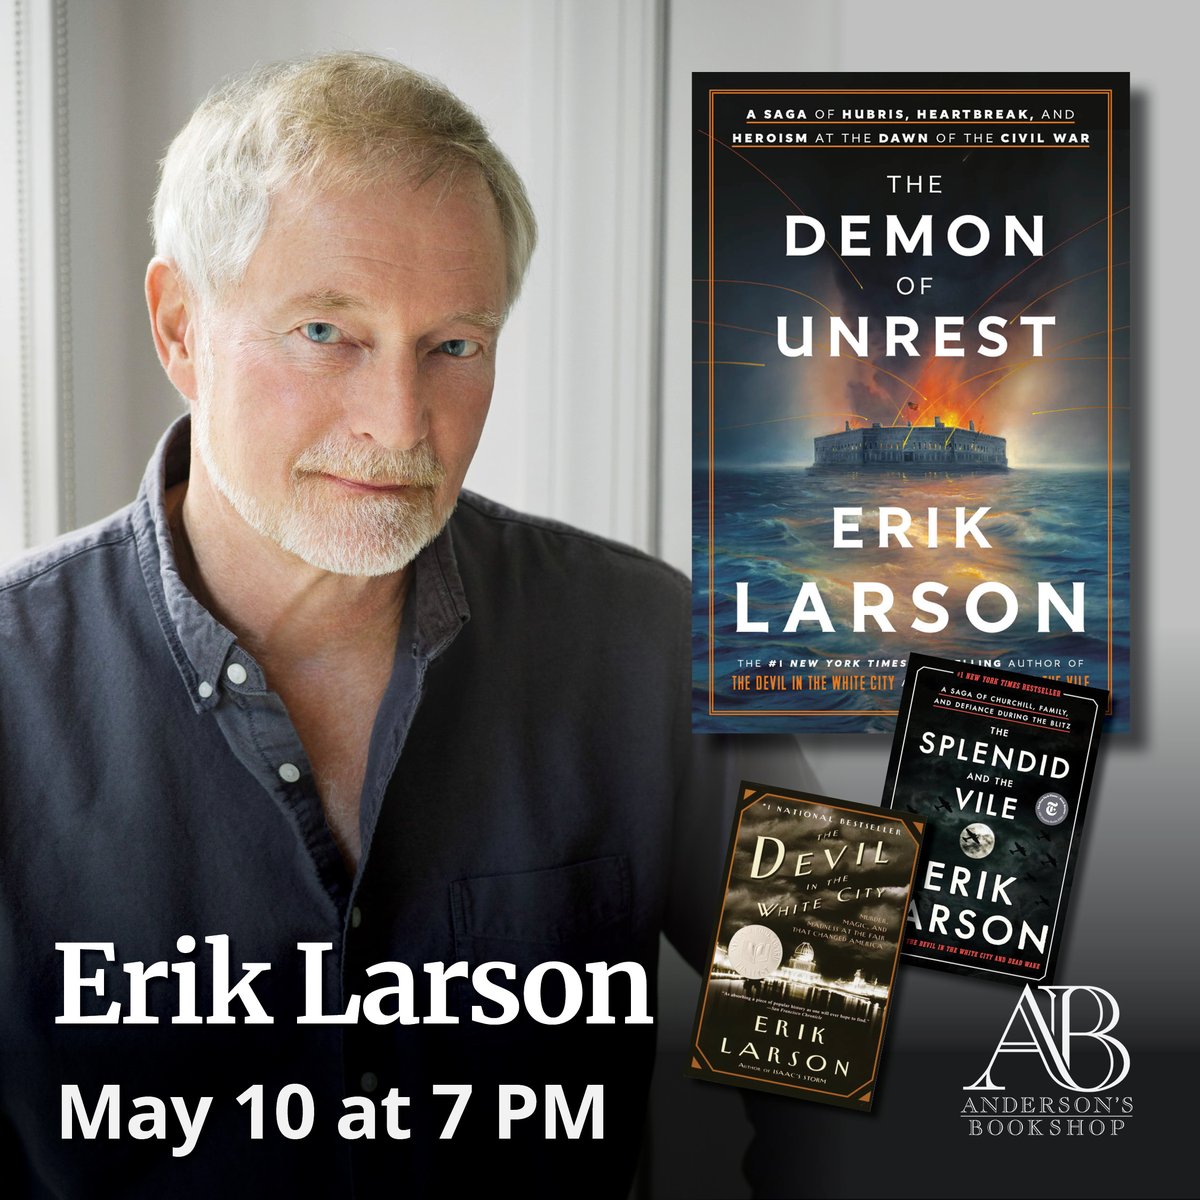 FRIDAY MAY 10th: We excitedly welcome back Erik Larson @exlarson with his latest! Erik will present and take Q&A. Books will be pre-signed. Don't miss this - he is a FASCINATING presenter! TICKETS: ErikLarsonAndersons.eventcombo.com